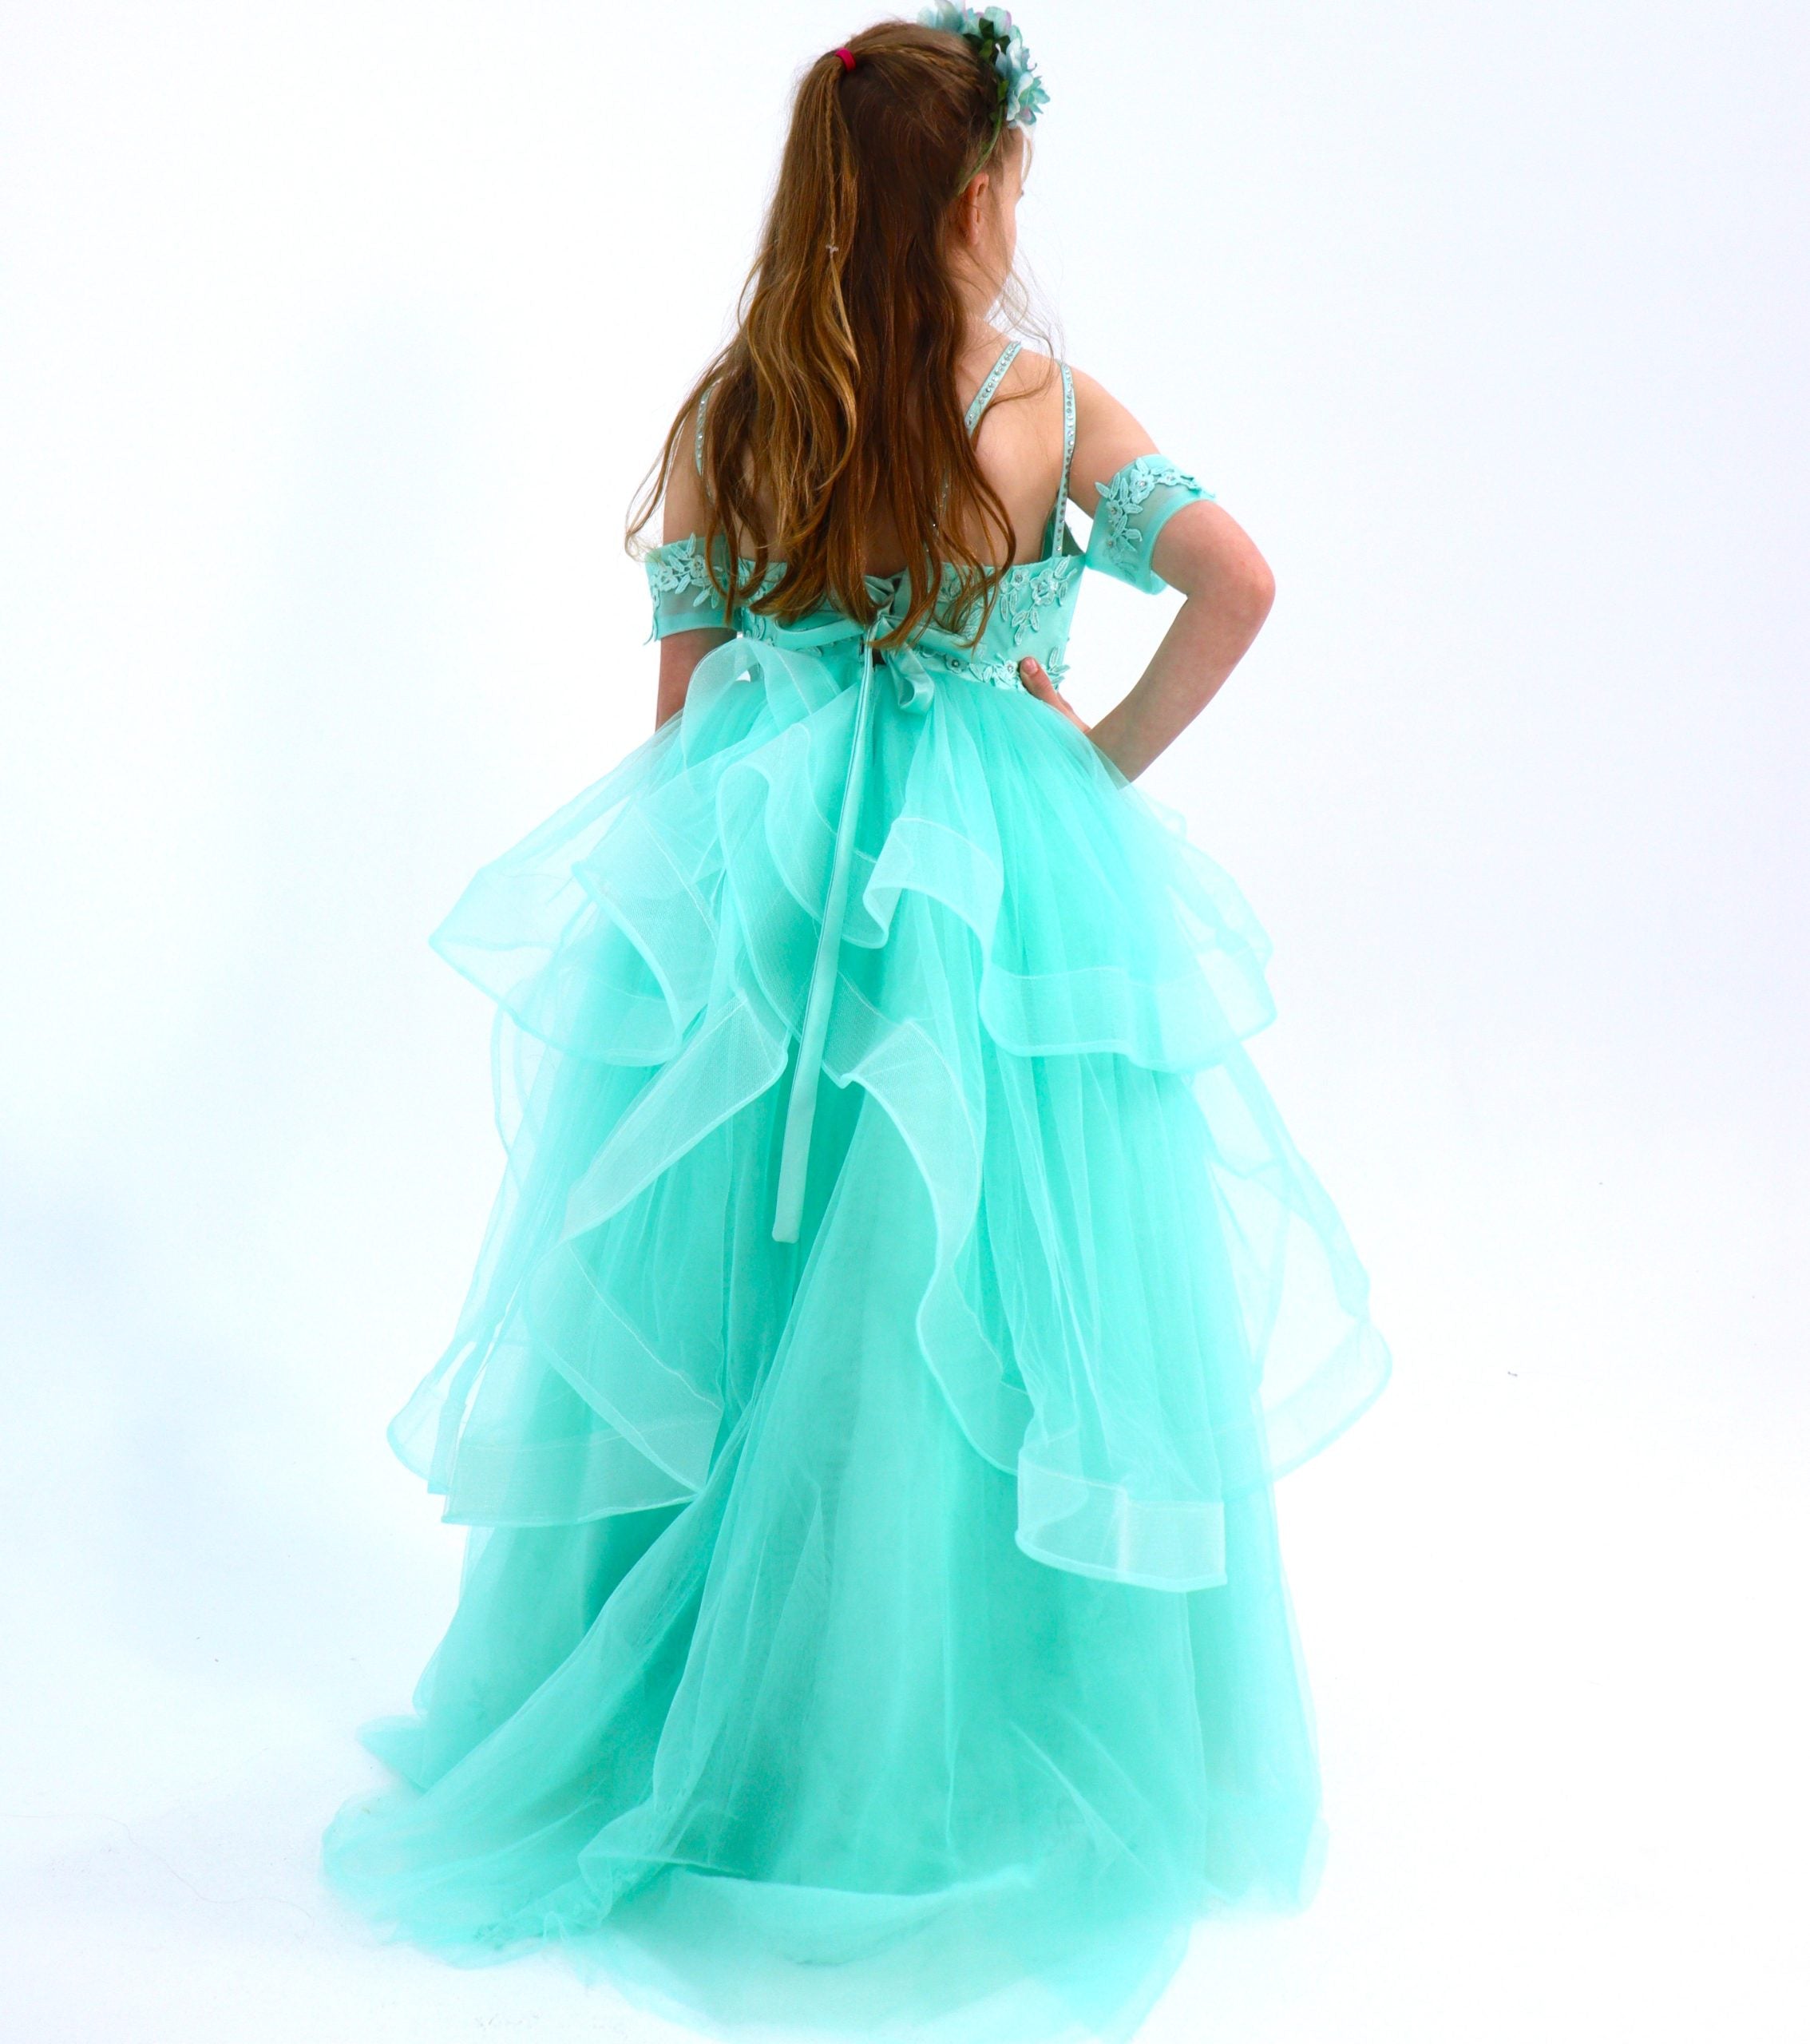 Skye Turquoise Gown